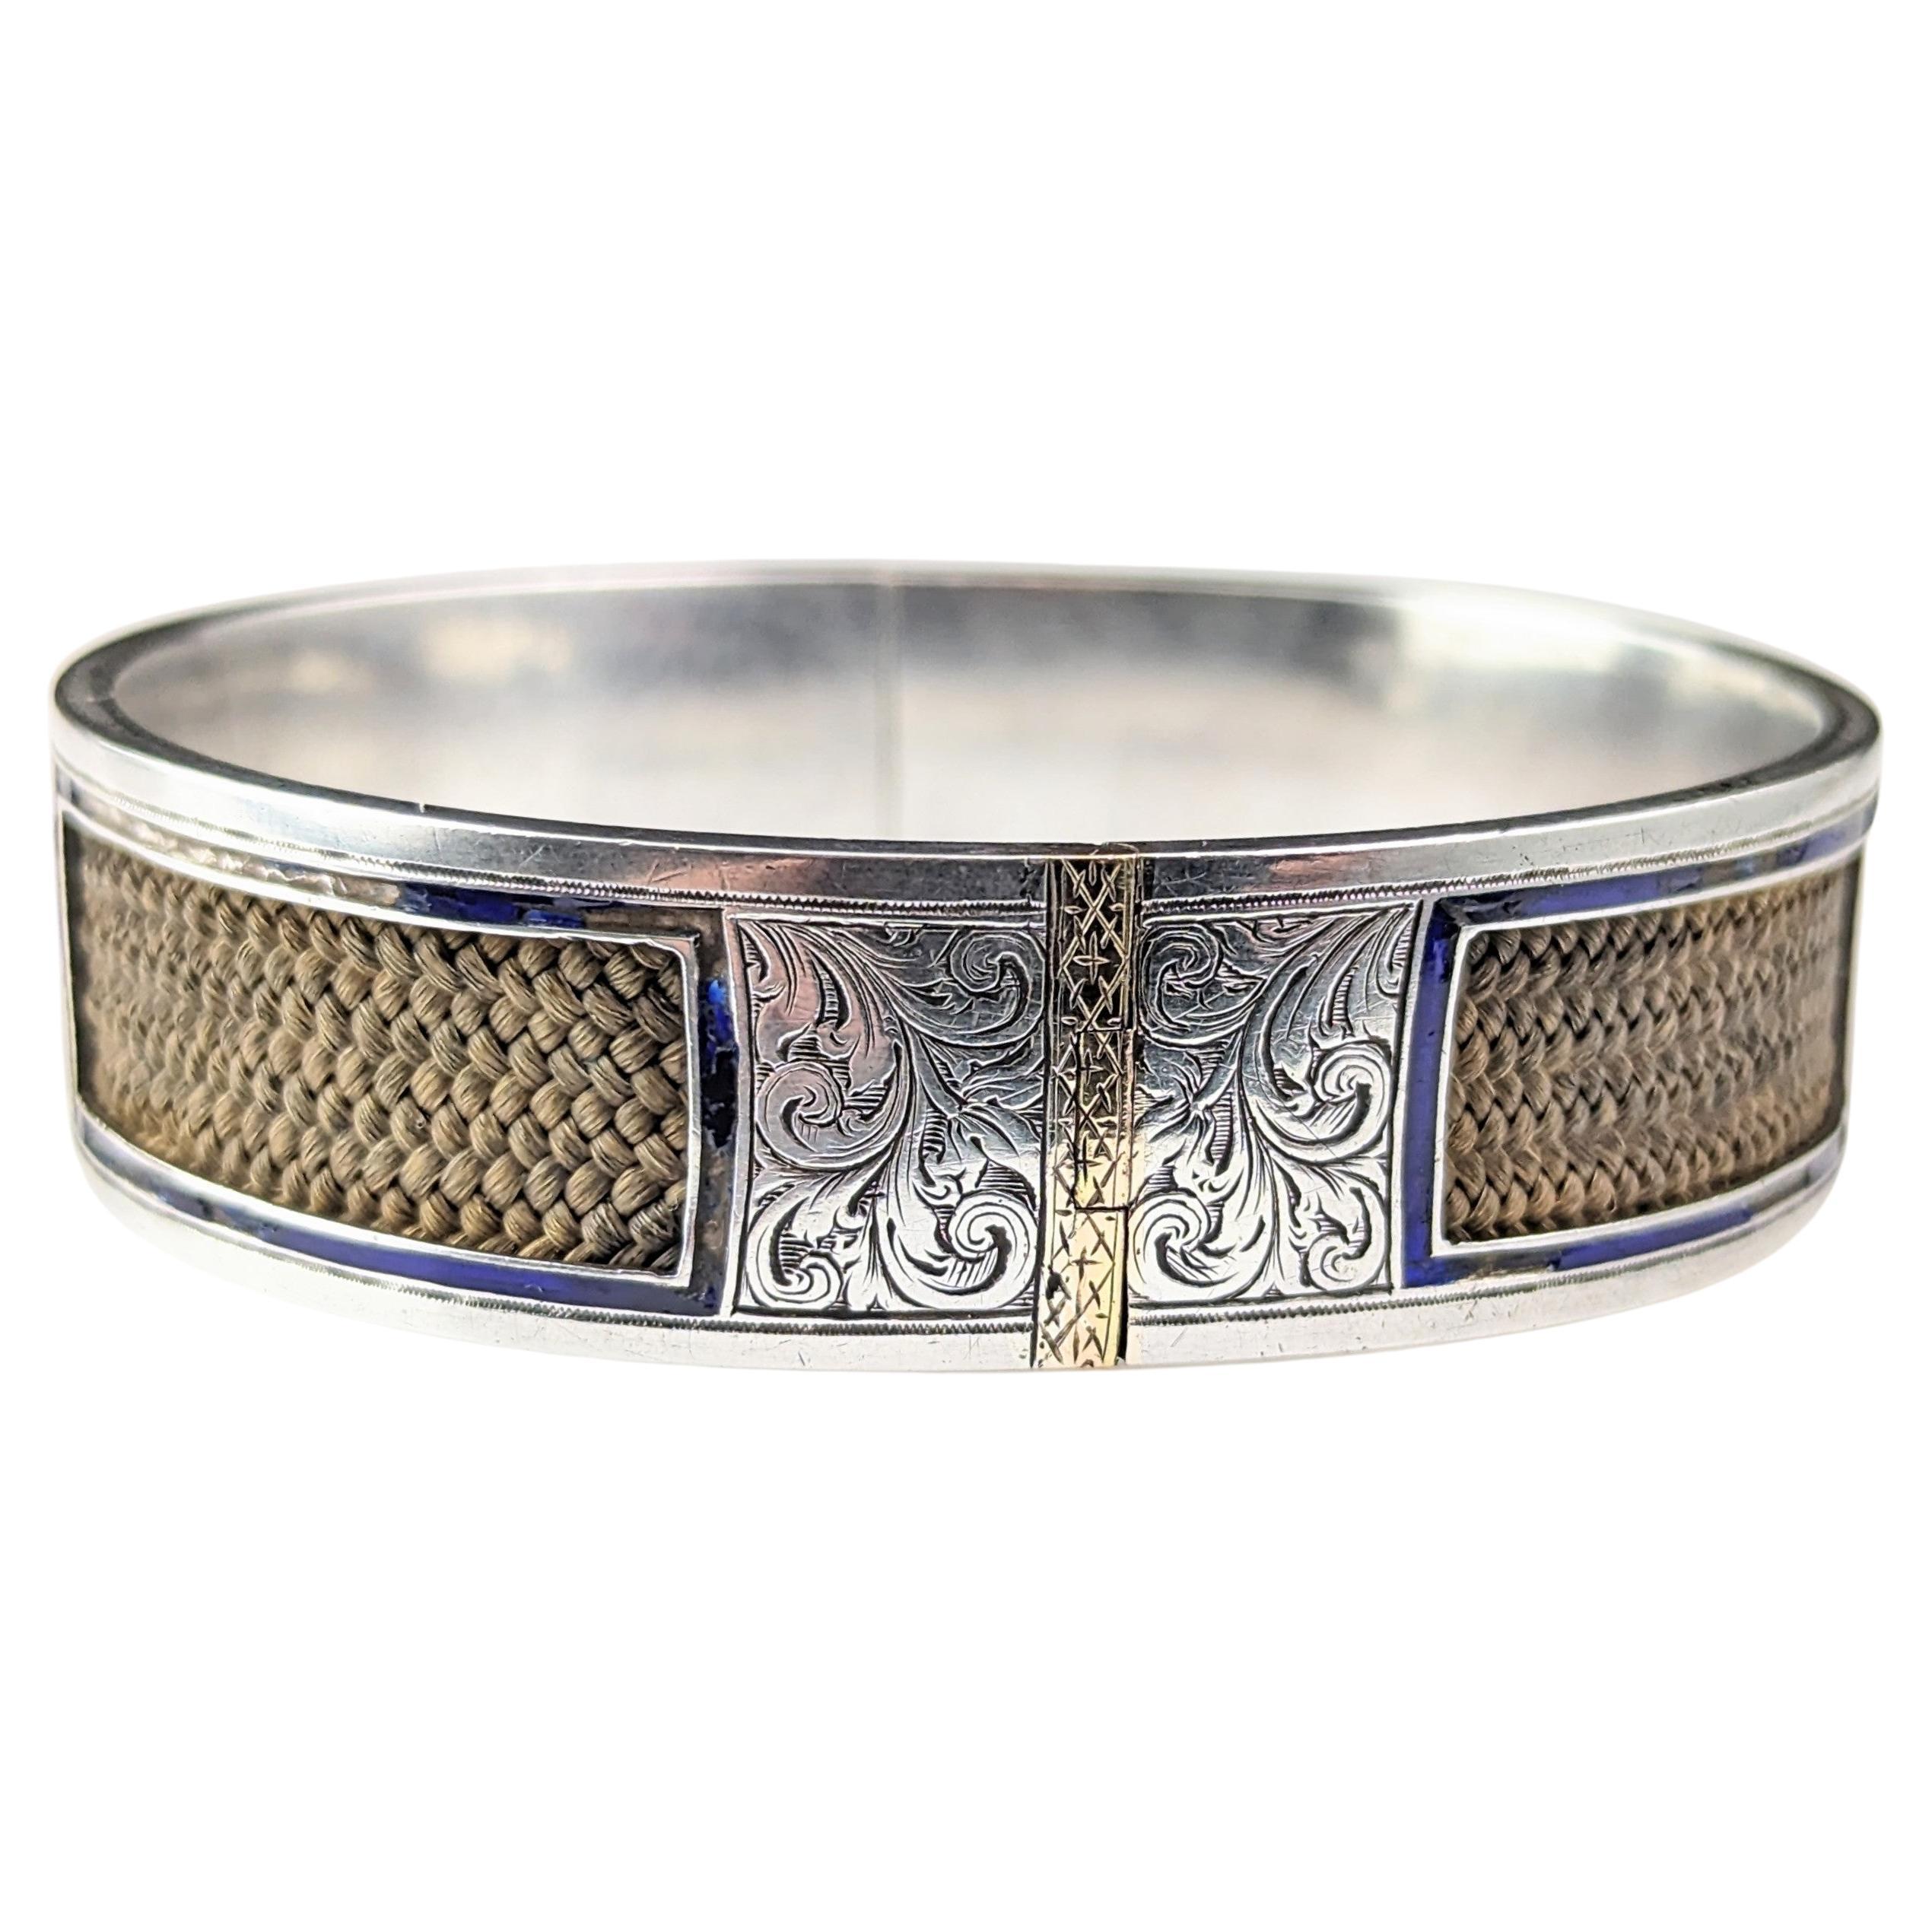 Antique Mourning bangle, Sterling silver and 9k gold, Blue enamel and hairwork 